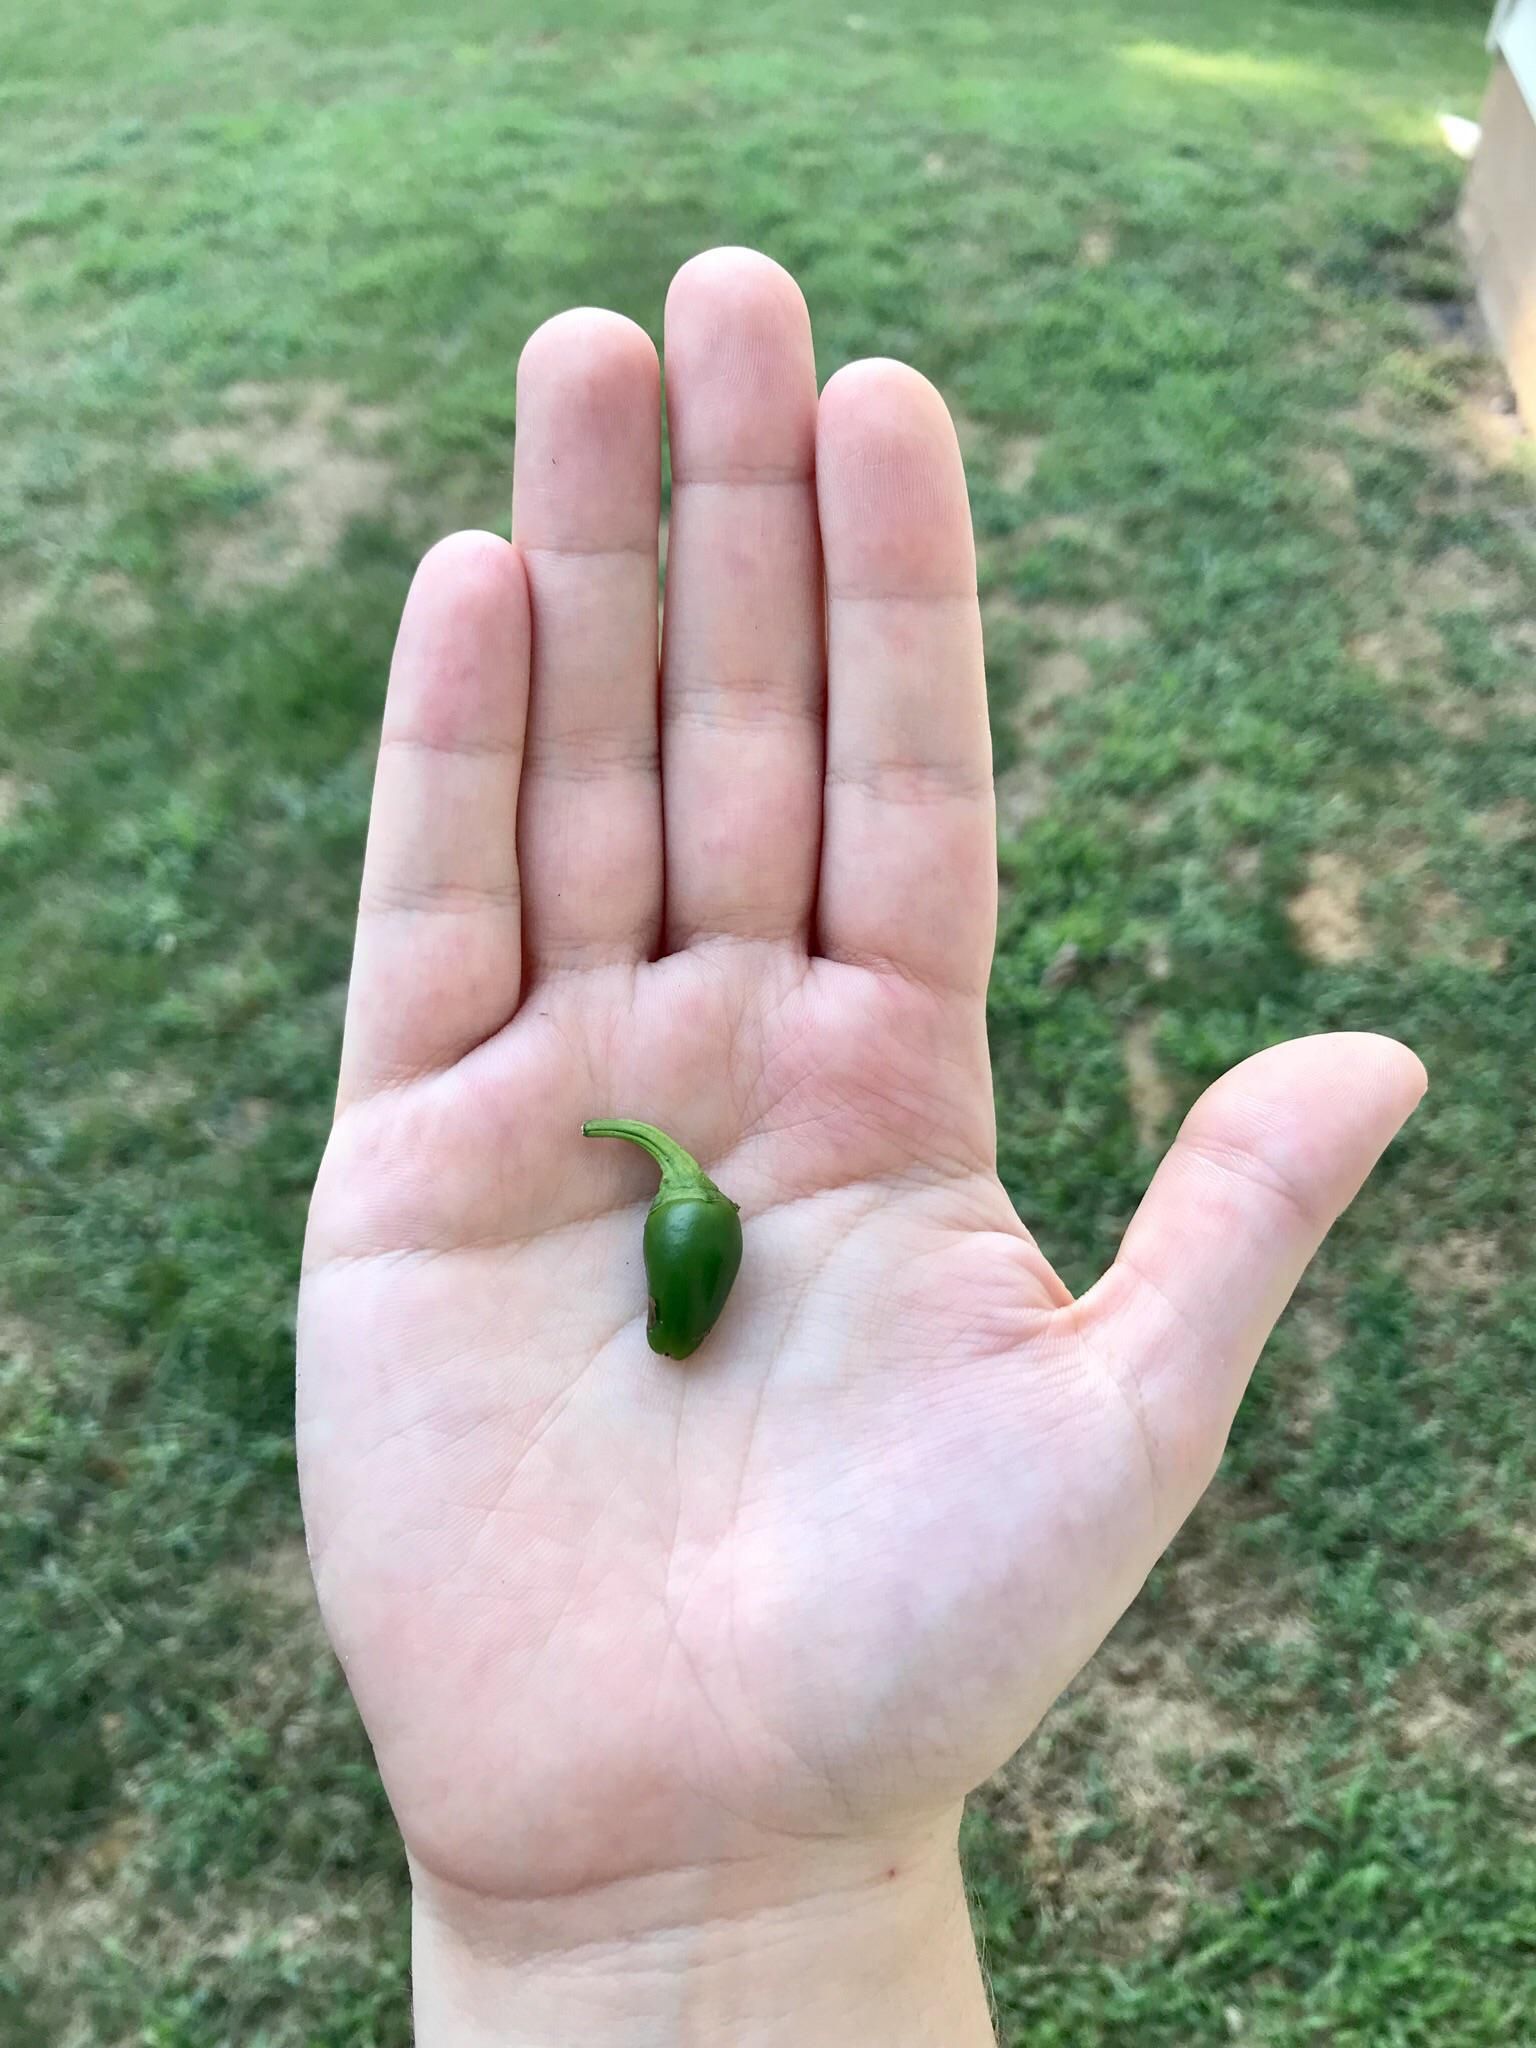 Should I get this guy from my jalapeño harvest a tiny sweater? Because he’s a little chili.